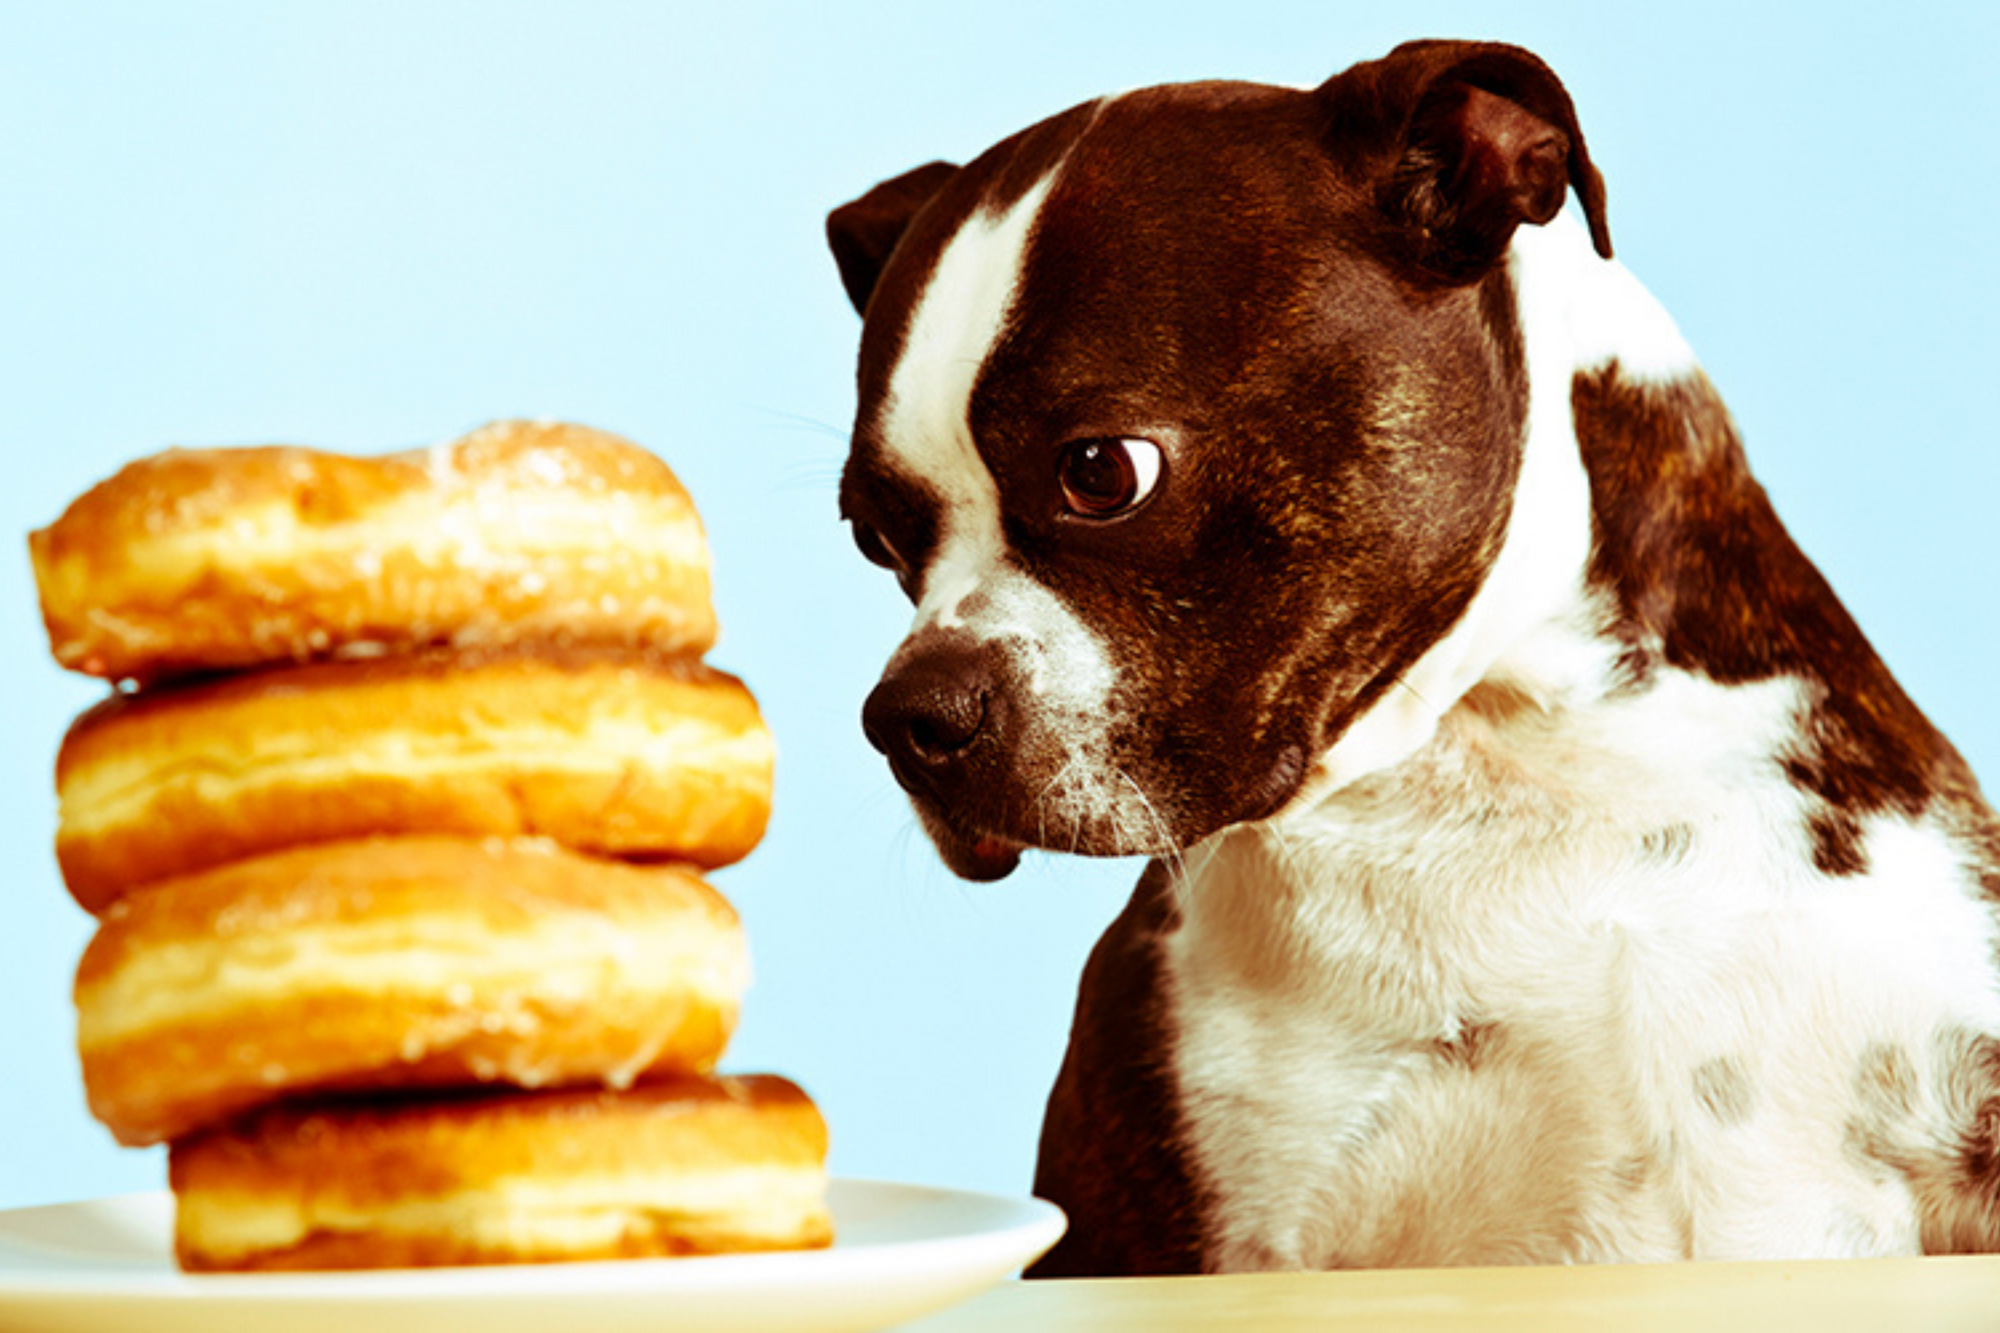 31 Foods That You Should Avoid Feeding to Your Dog